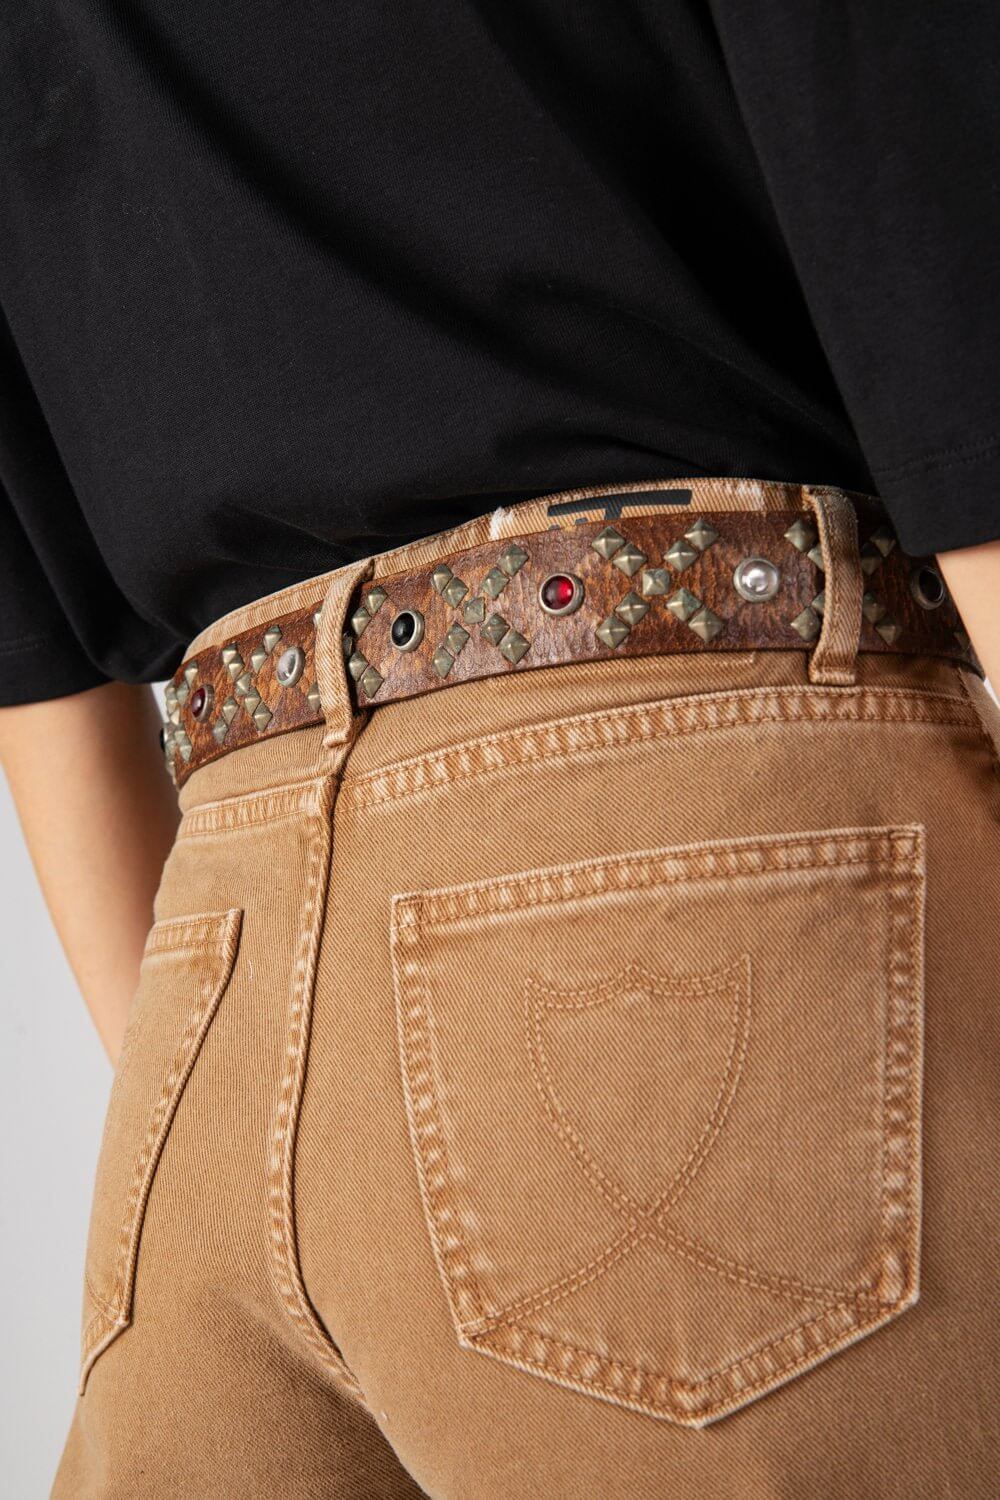 WHISKY BELT Cognac leather belt with studs and rhinestones. Brass buckle. Height: 4 cm. HTC LOS ANGELES